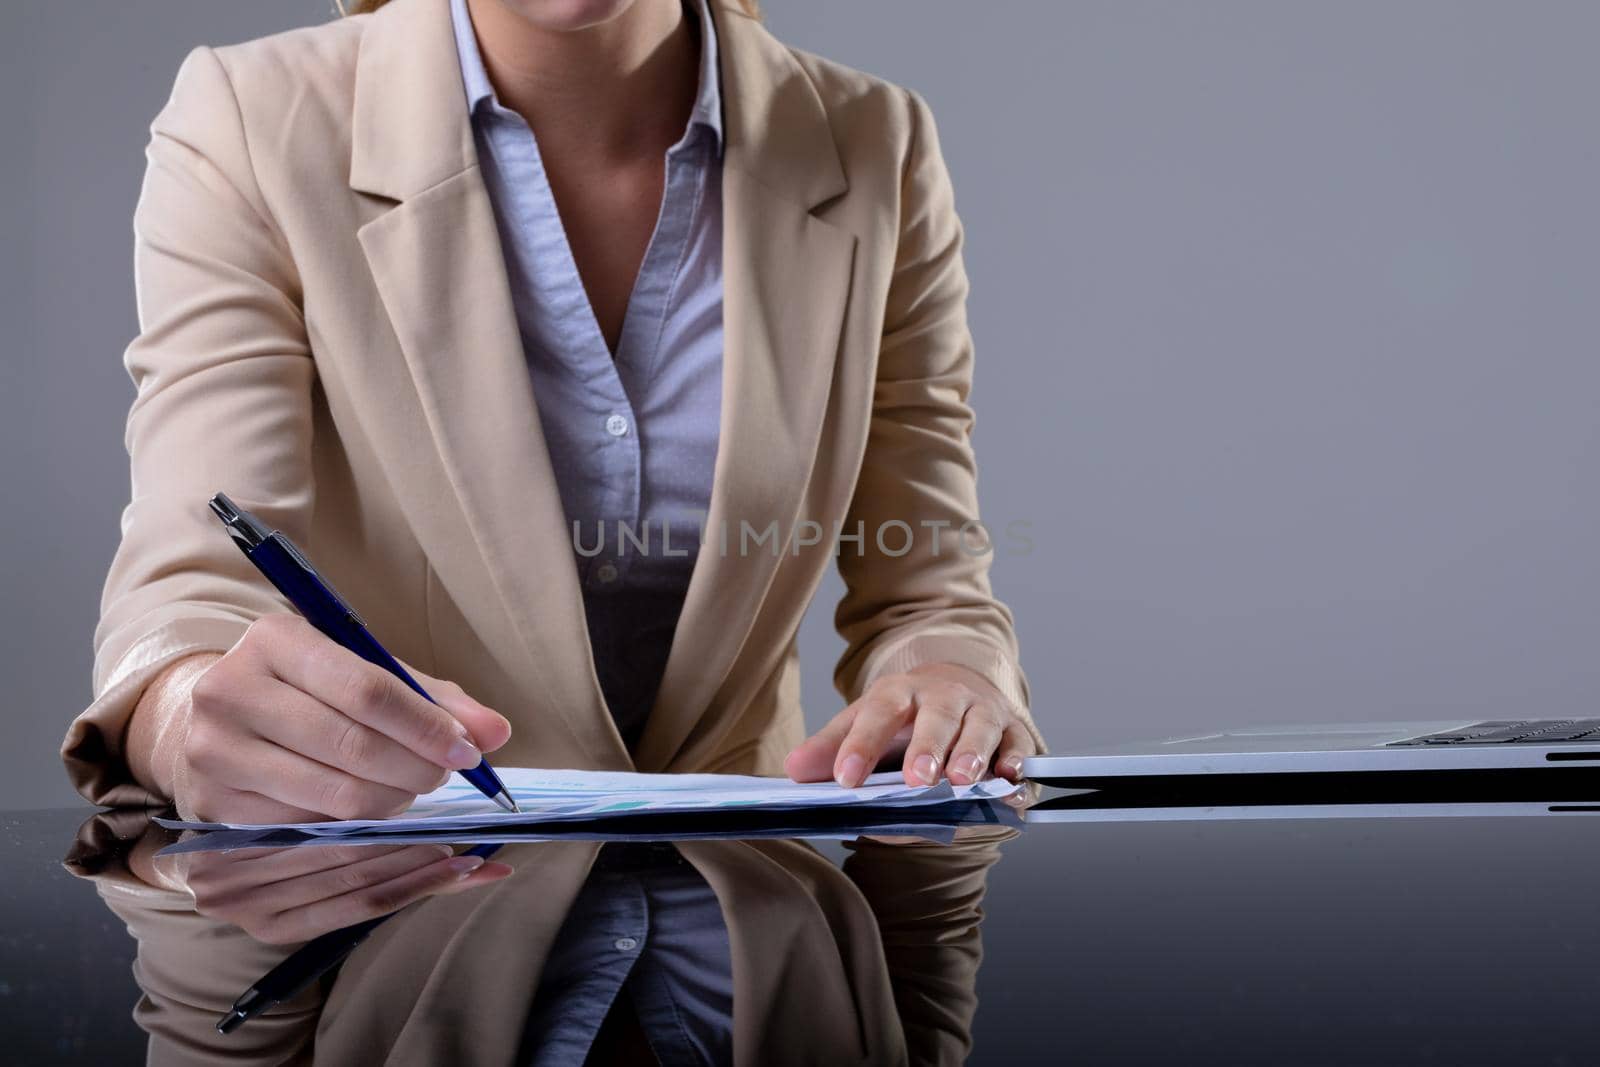 Midsection of caucasian businesswoman using laptop and taking notes, isolated on grey background. business, technology, communication and growth concept.